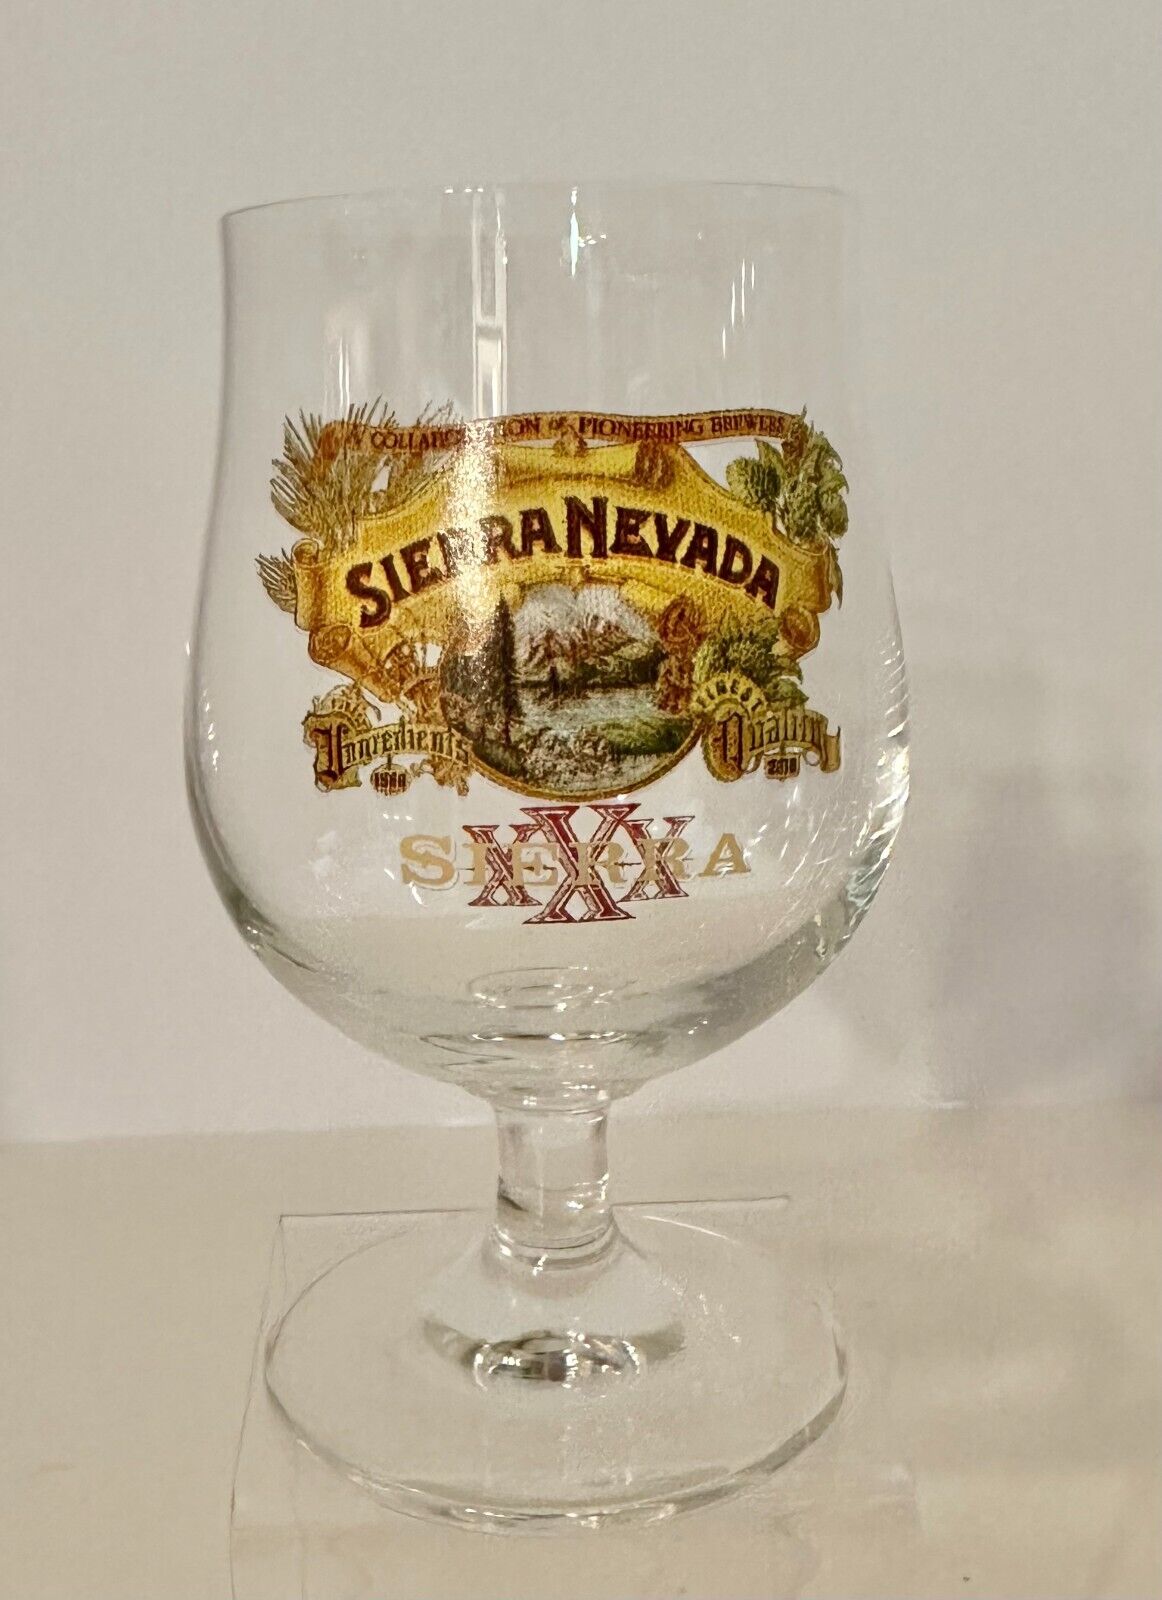 Sierra Nevada Full Color Tulip Glass 30th Anniversary Celebration Collectable